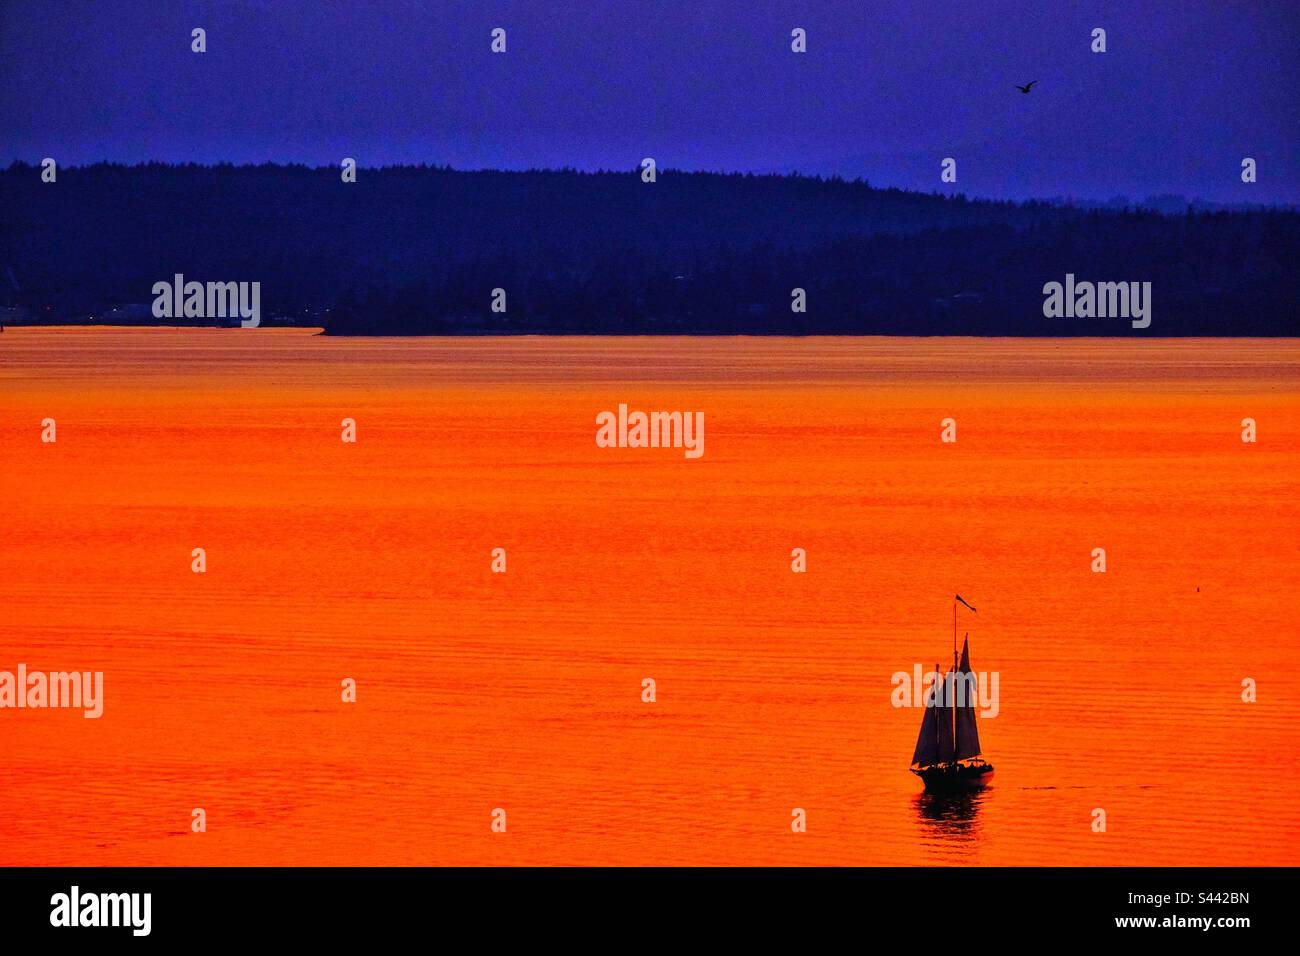 Afterglow from setting sun over the Salish Sea from Seattle looking west colors the water orange with a sailboat sailing off into the evening in late spring. Stock Photo